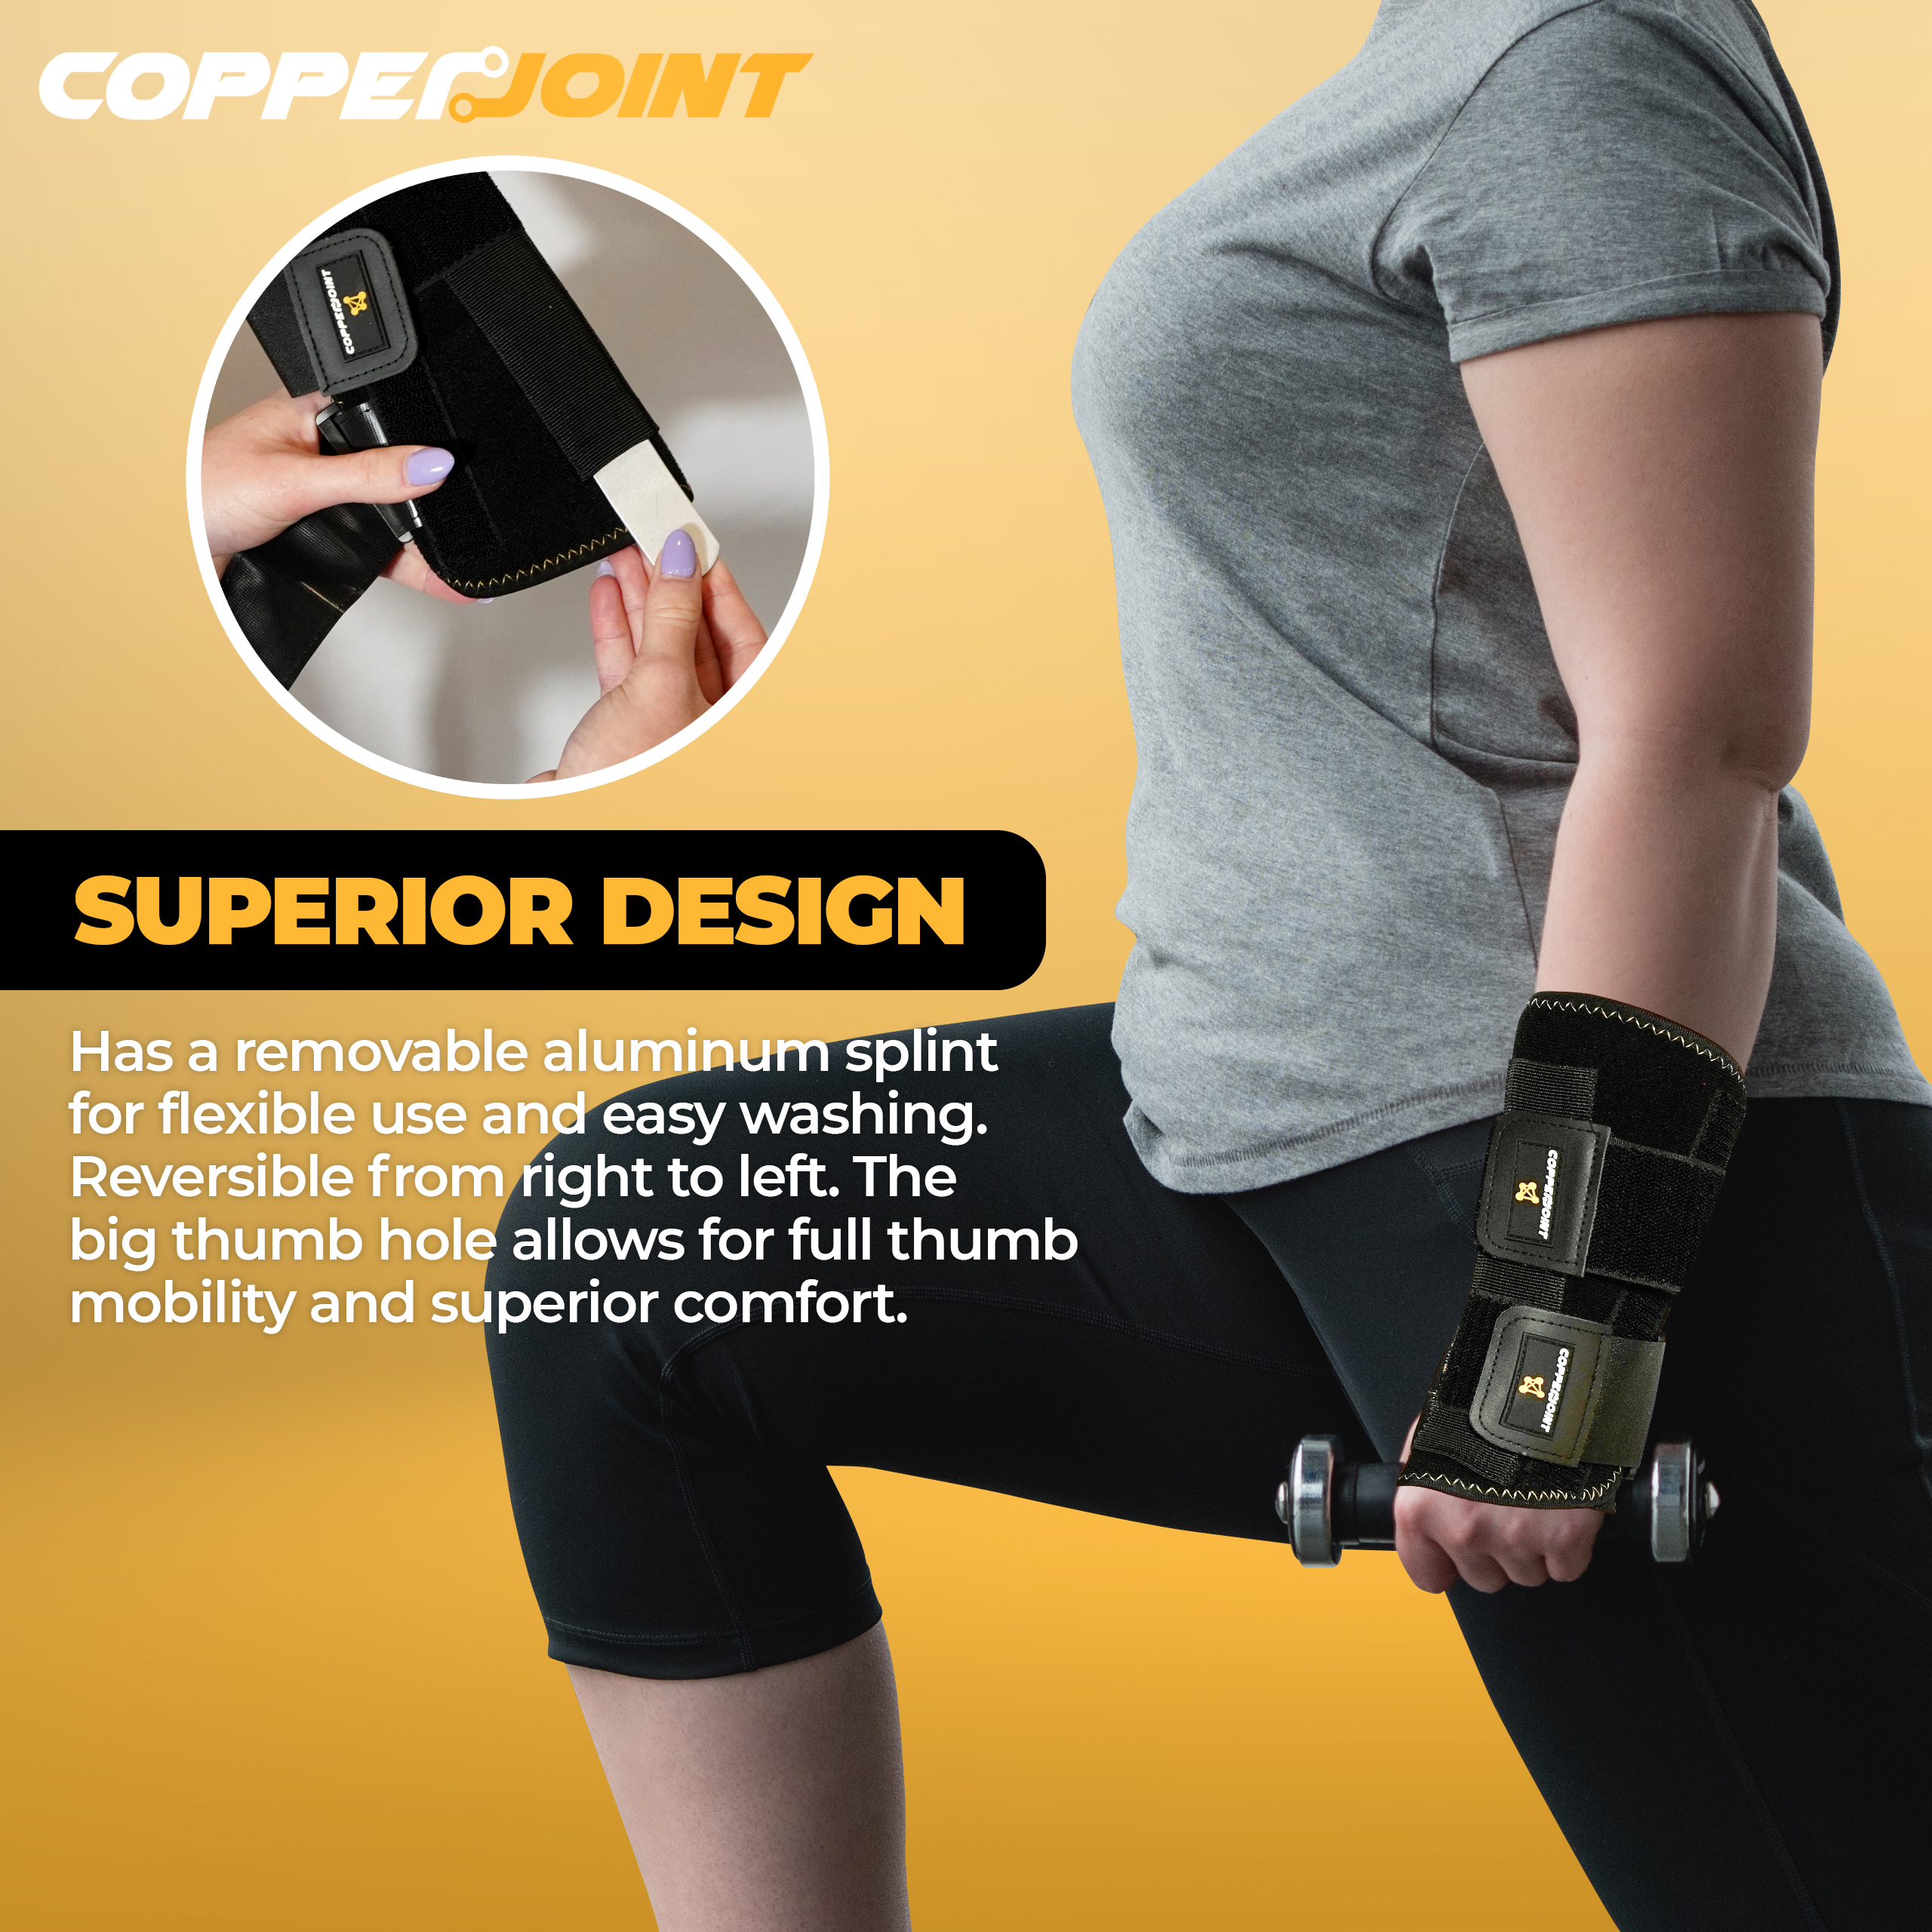 New Carpal Tunnel Wrist Brace Night Support Received Well by Amazon Customers